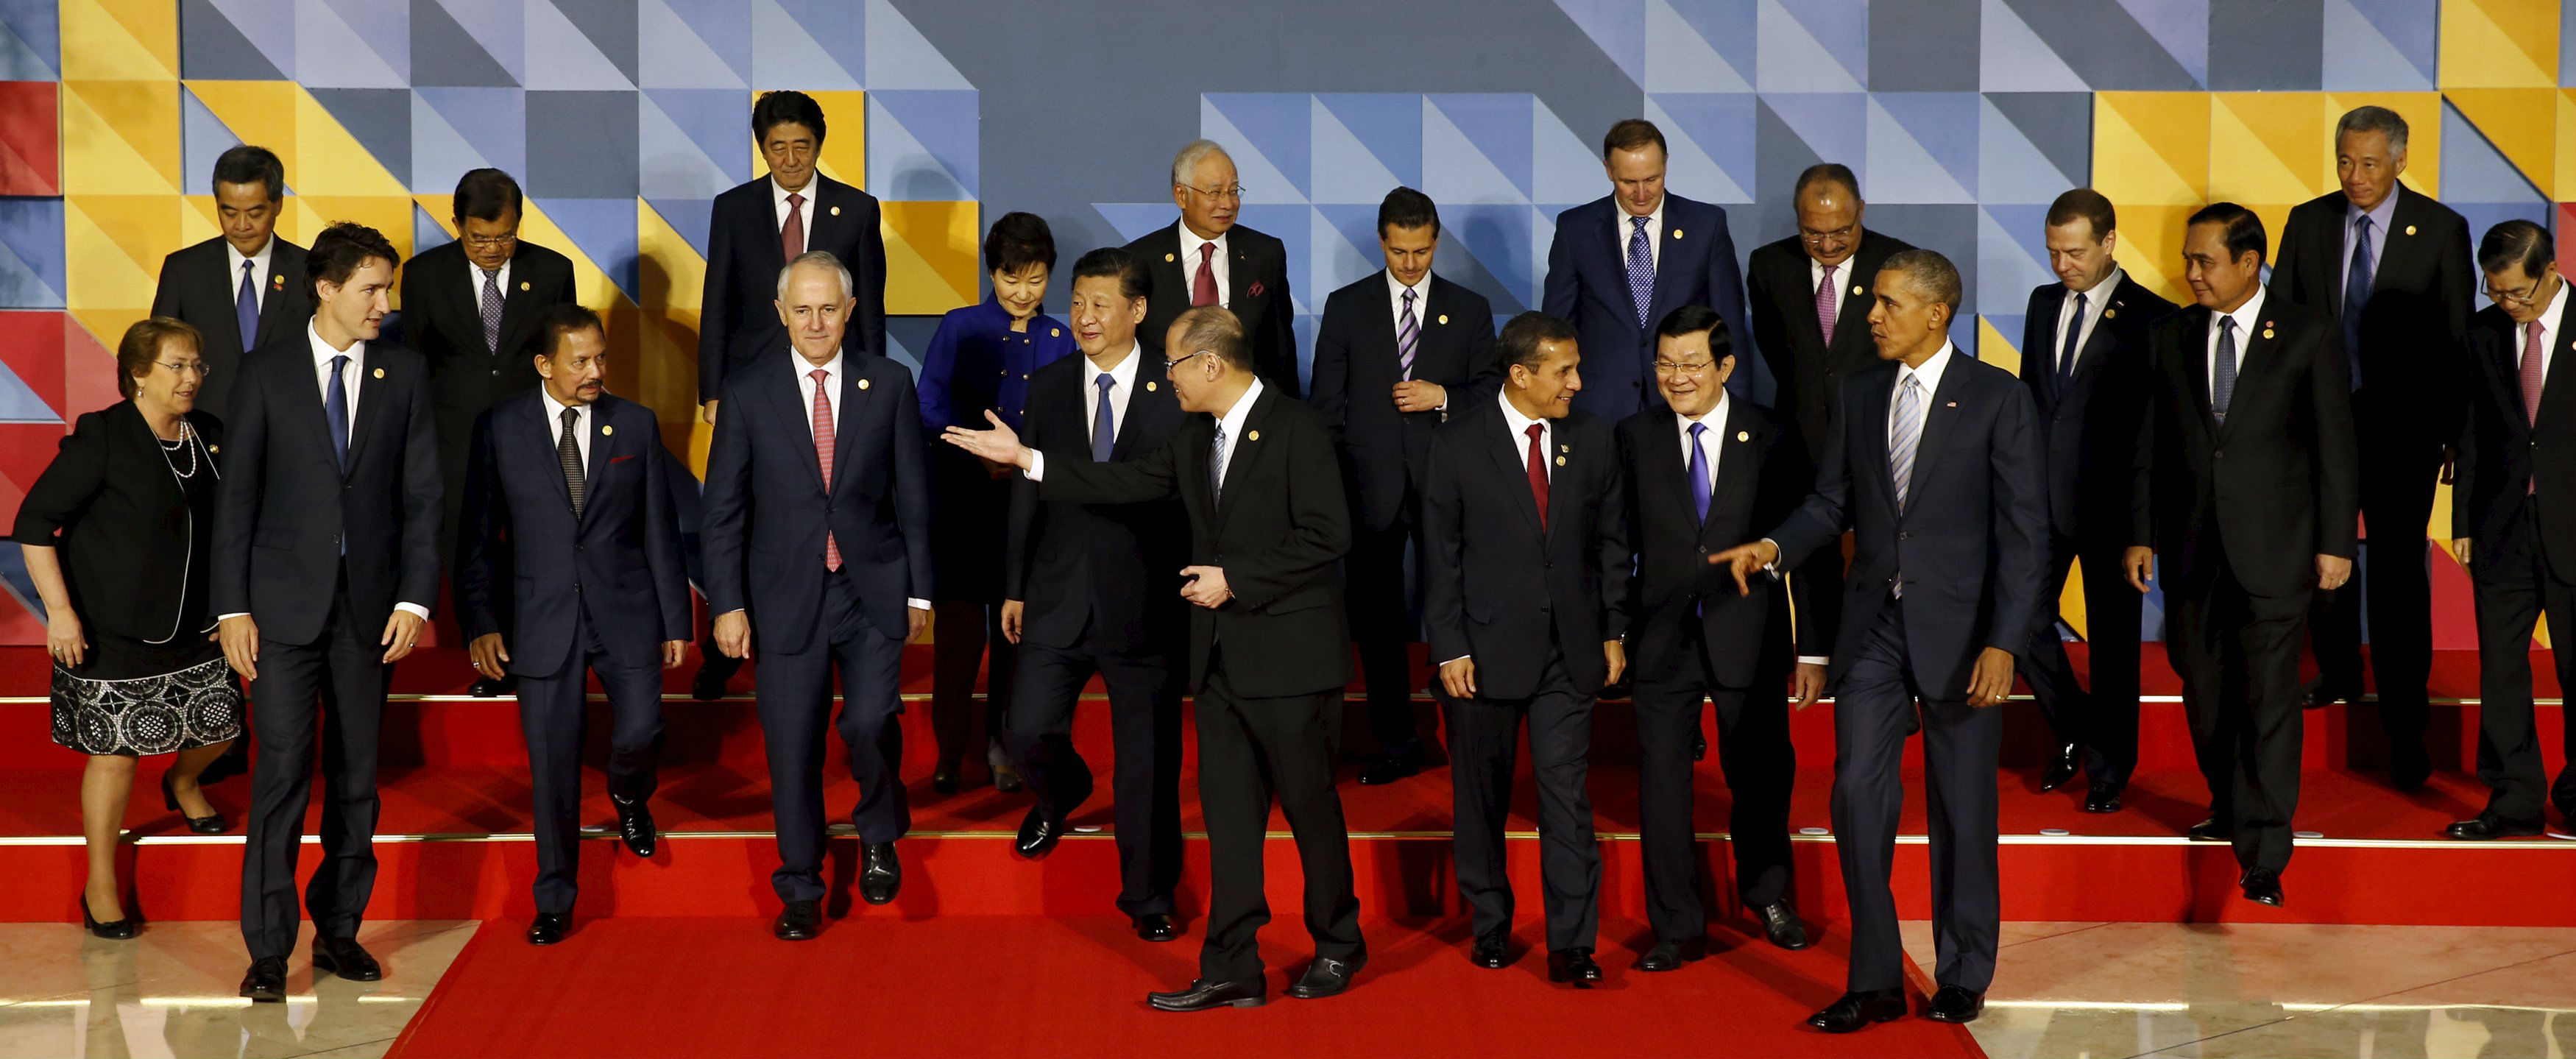 LOOK World leaders pose for APEC photo ABSCBN News